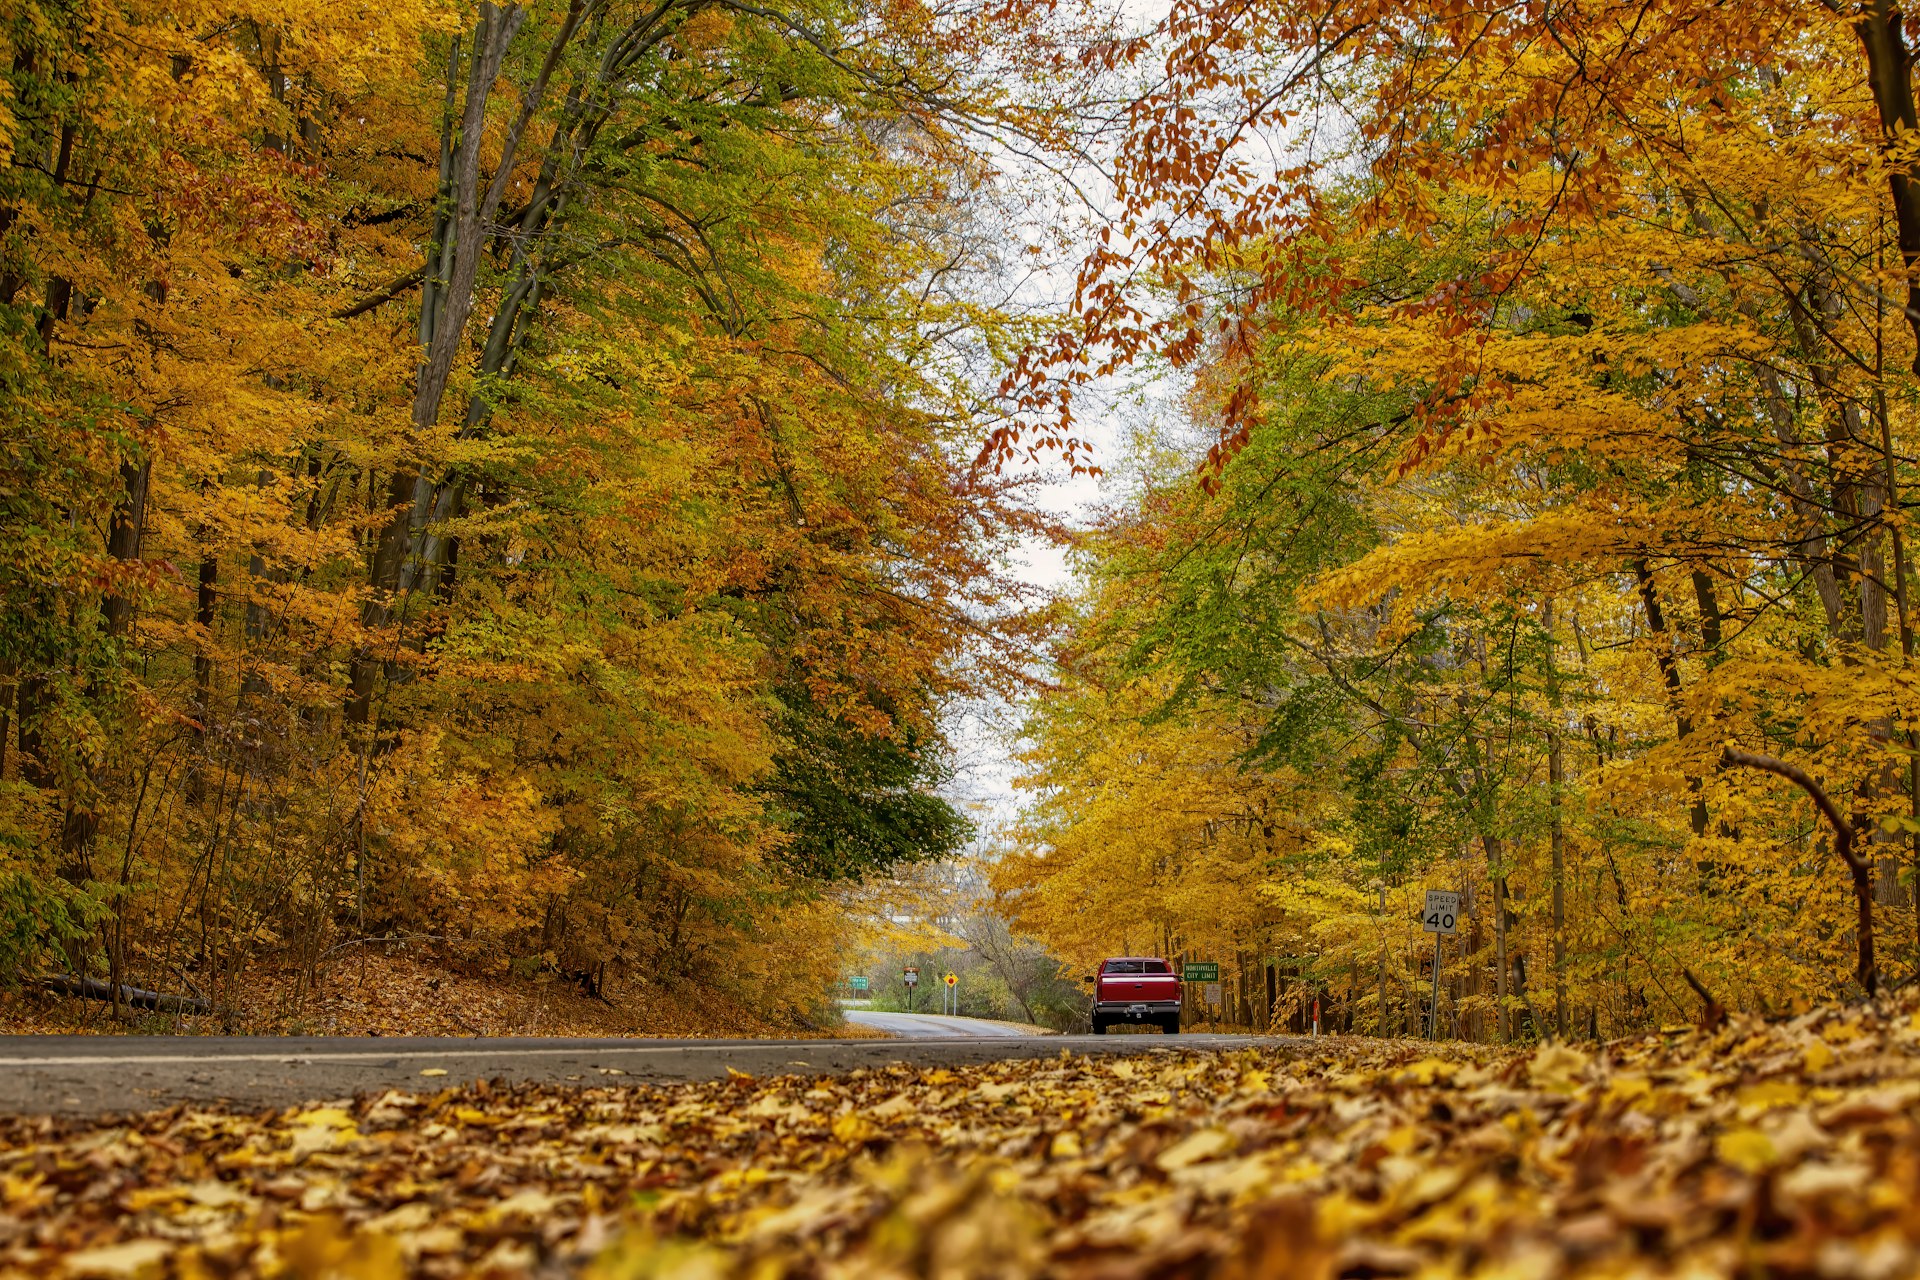 A low-angle shot of a red pickup truck driving through vibrant orange and red foliage on a curvy road